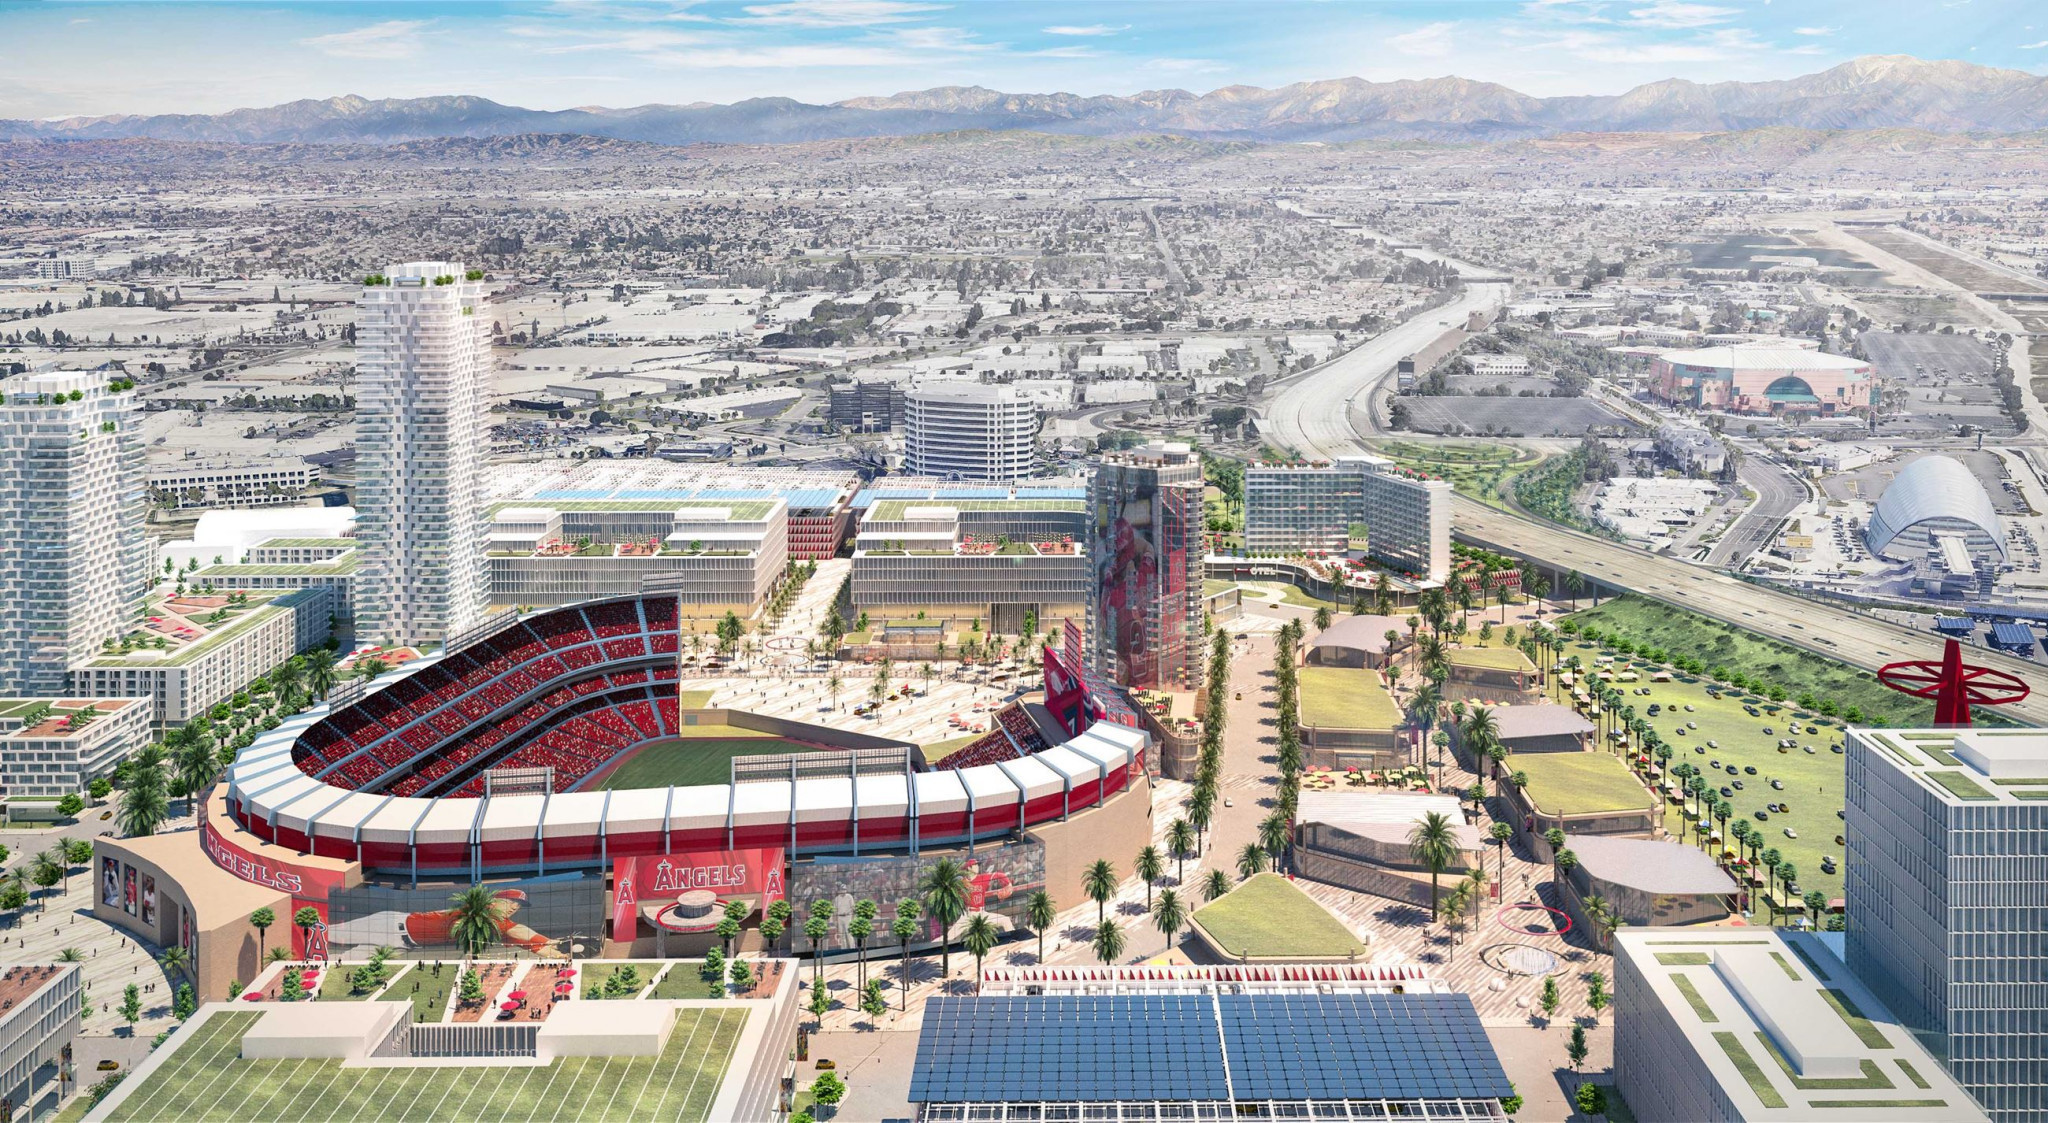 The California Department of Housing and Community Development charged Anaheim with breaking state laws over the Angel Stadium sale ©City of Anaheim